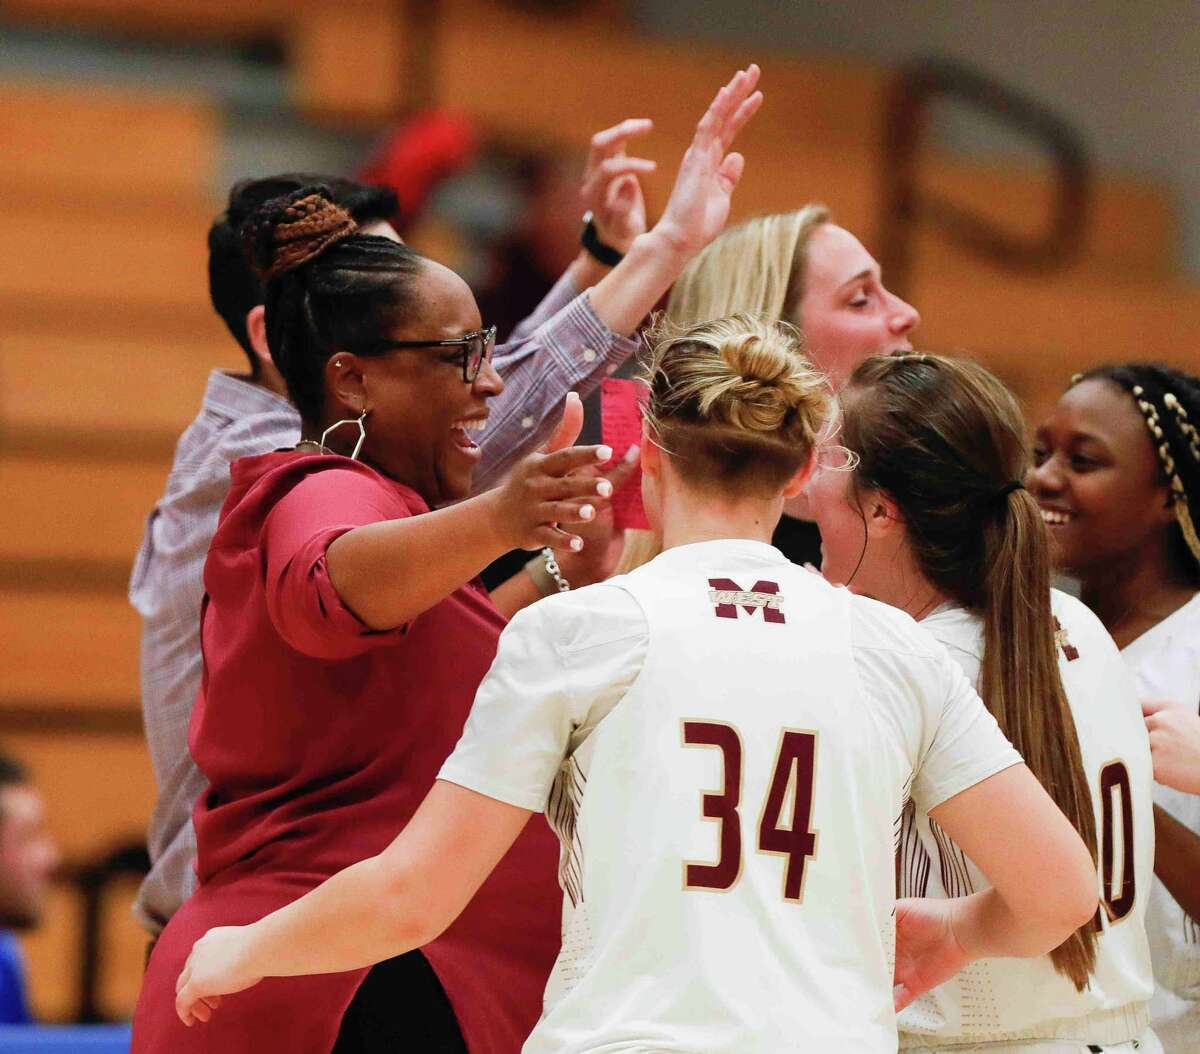 Magnolia West coach Darcie Moore celebrates after rallying for a 44-41 win over Lake Creek during a Region III-5A bi-district high school basketball playoff game at Grand Oak High School, Tuesday, Feb. 15, 2022, in Spring.